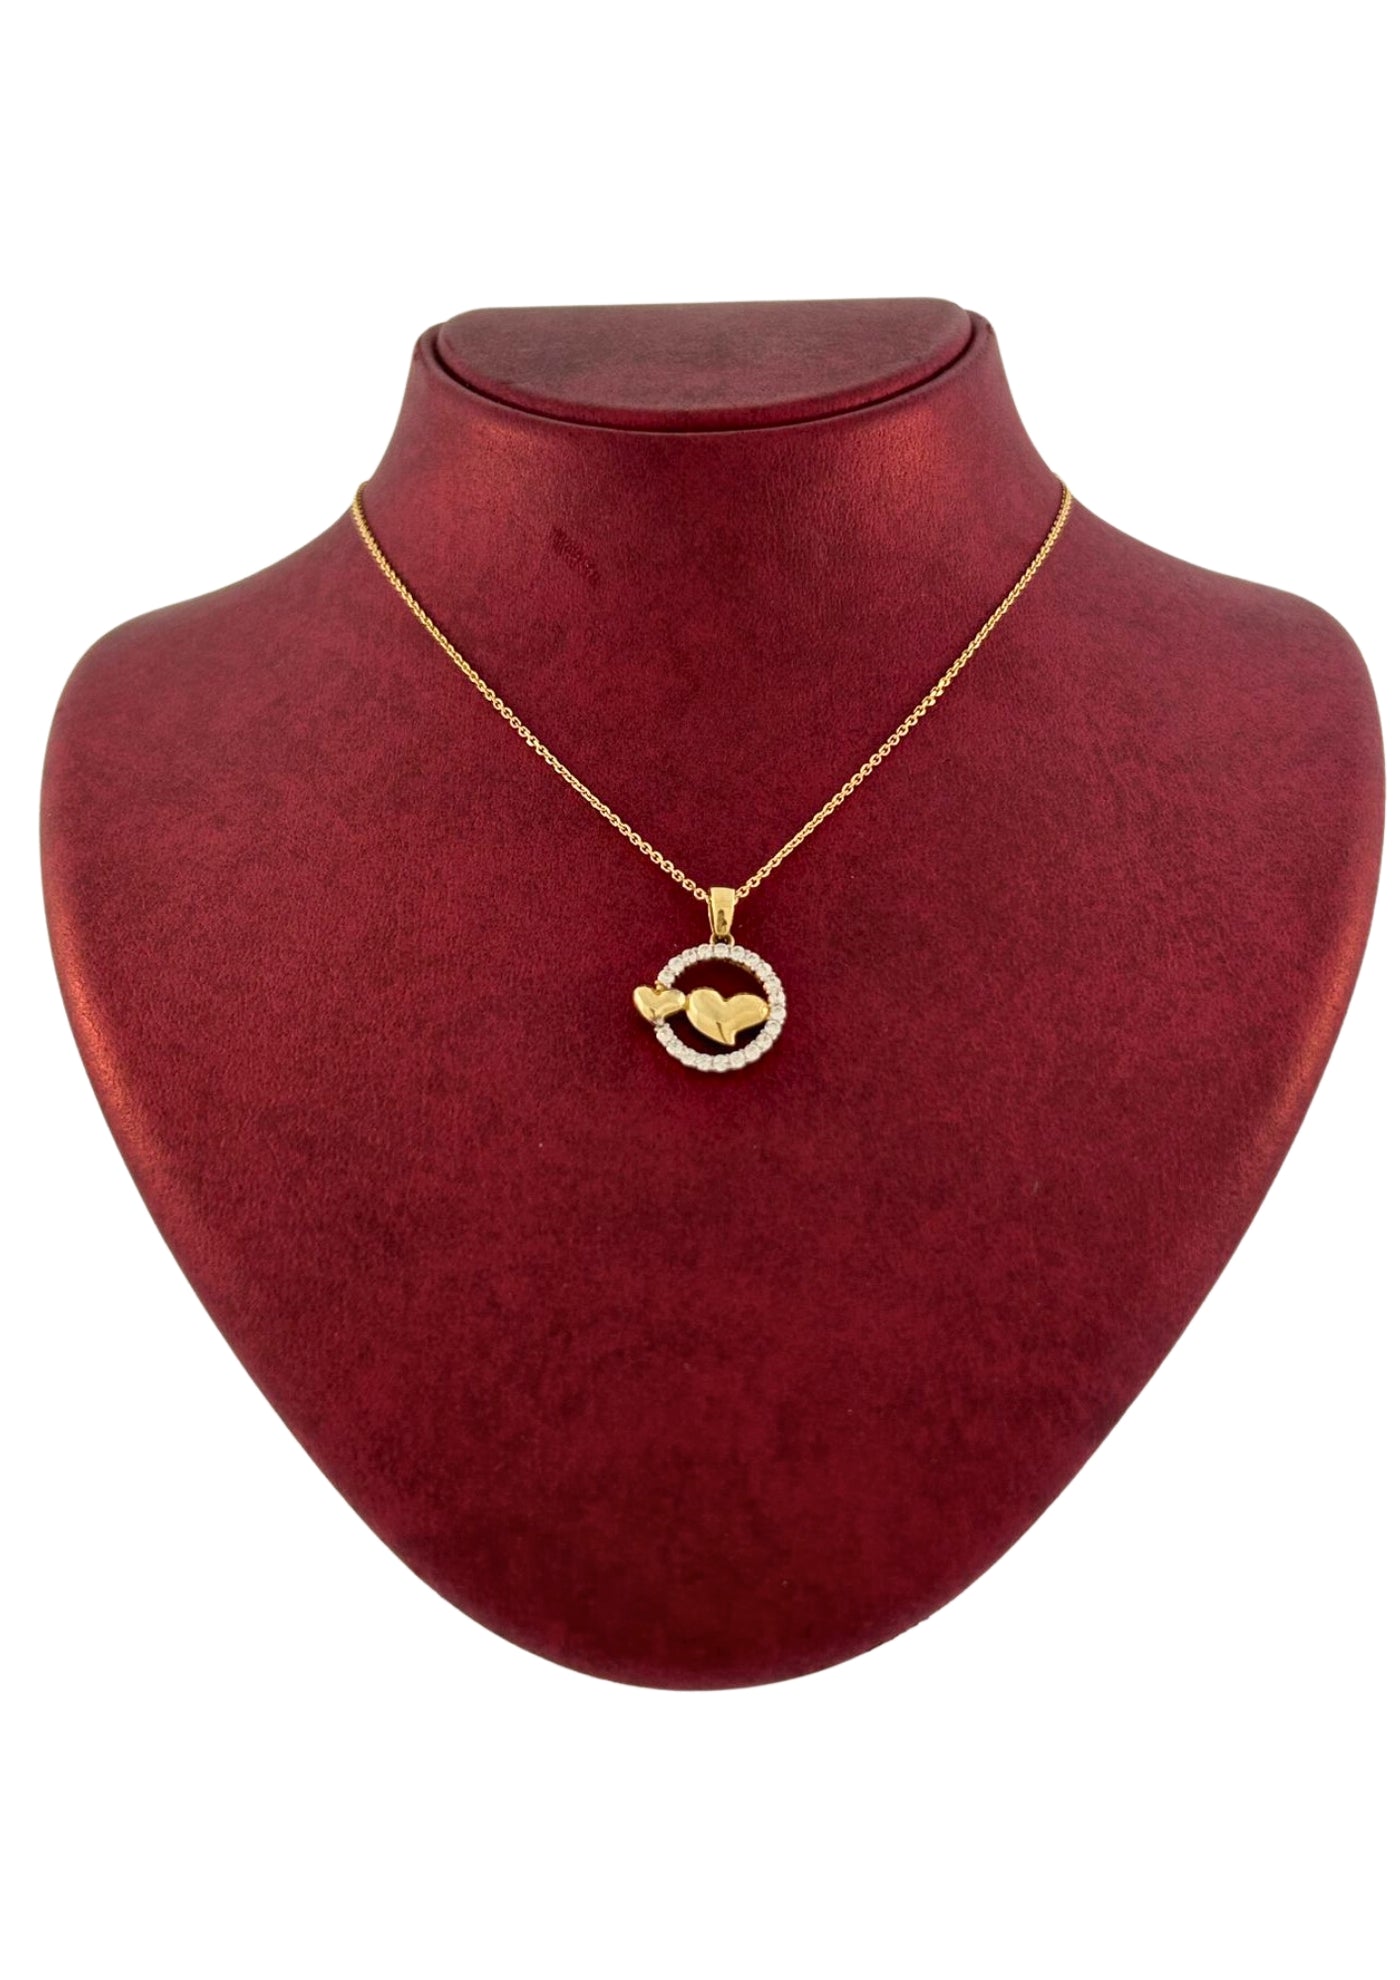 two full hearts in a cz cercle pendant 10k solid gold